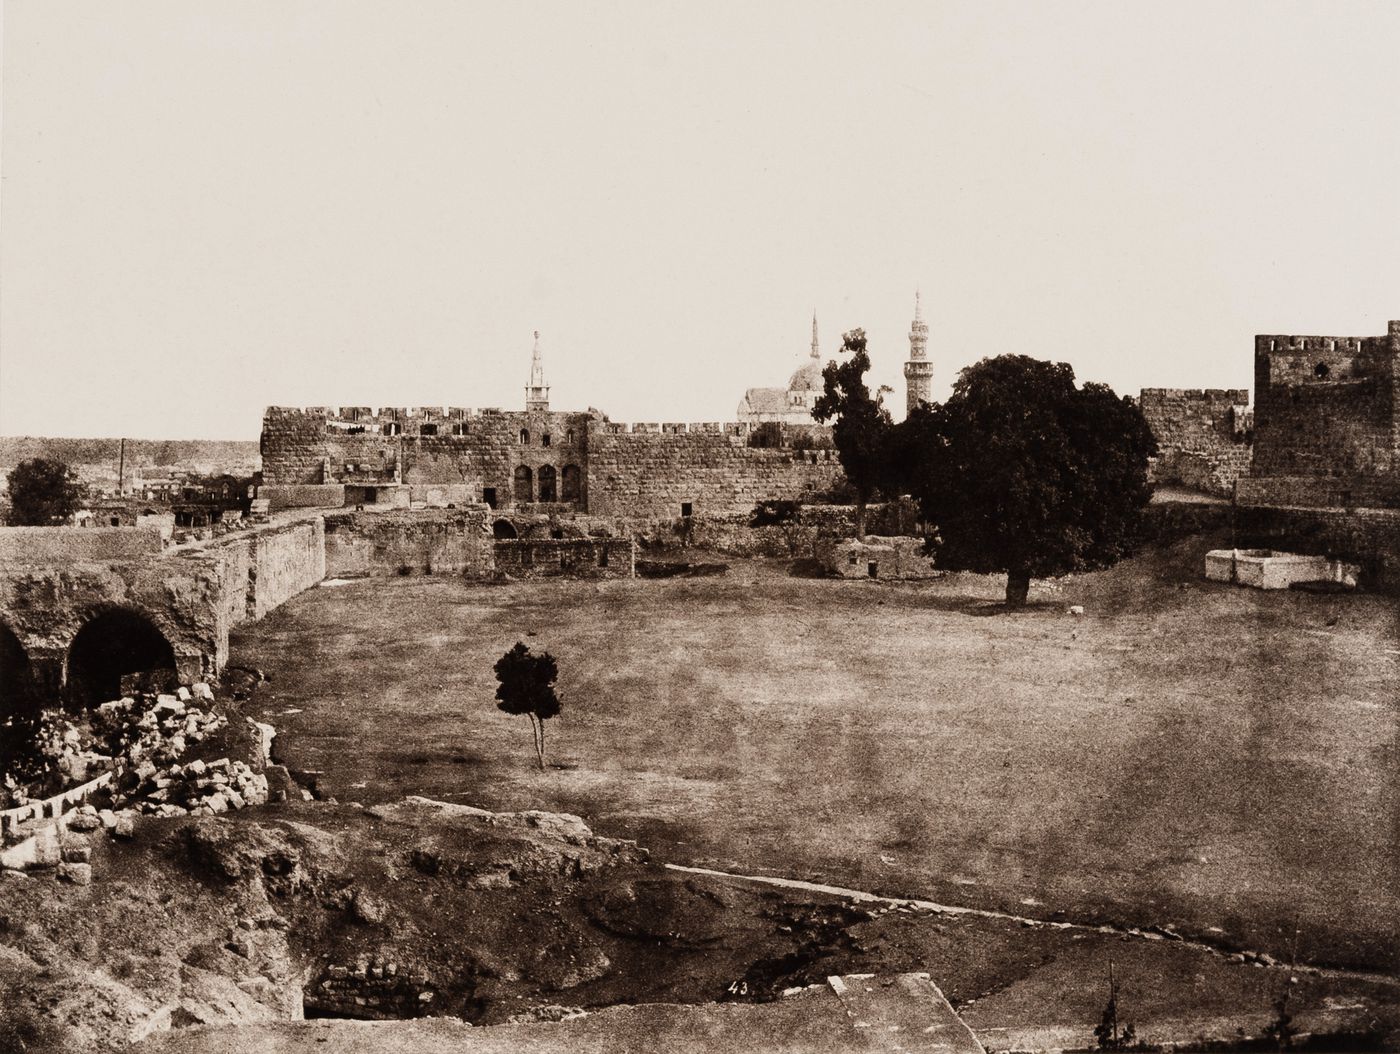 View of the ruins of the castle from within the walls, Damascus, Ottoman Empire (now in Syria)